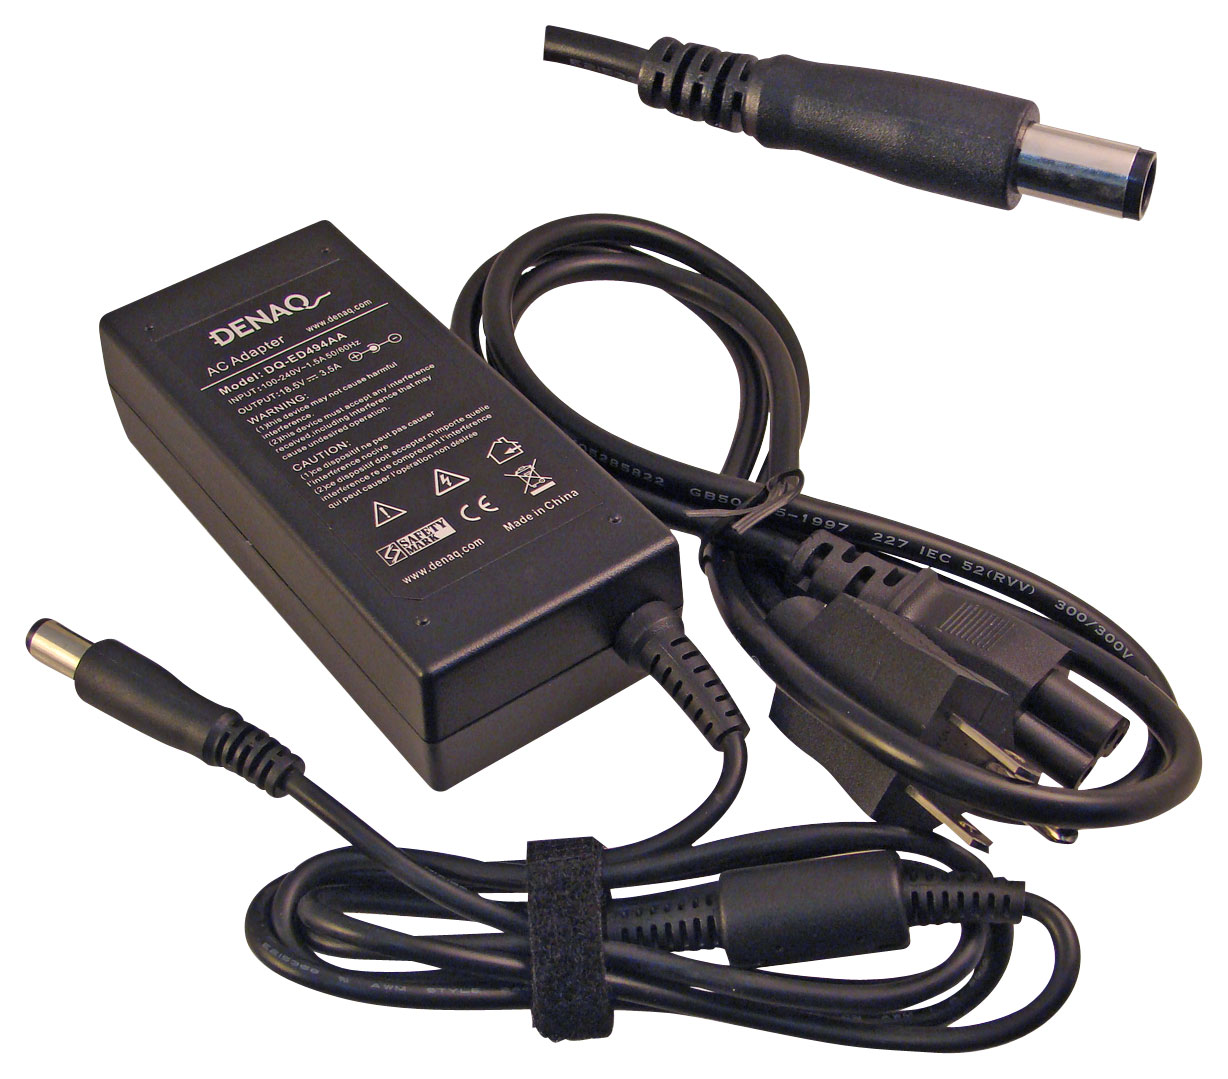 DENAQ AC Power Adapter and Charger for HP Laptops DQ-ED494AA-7450 - Best Buy